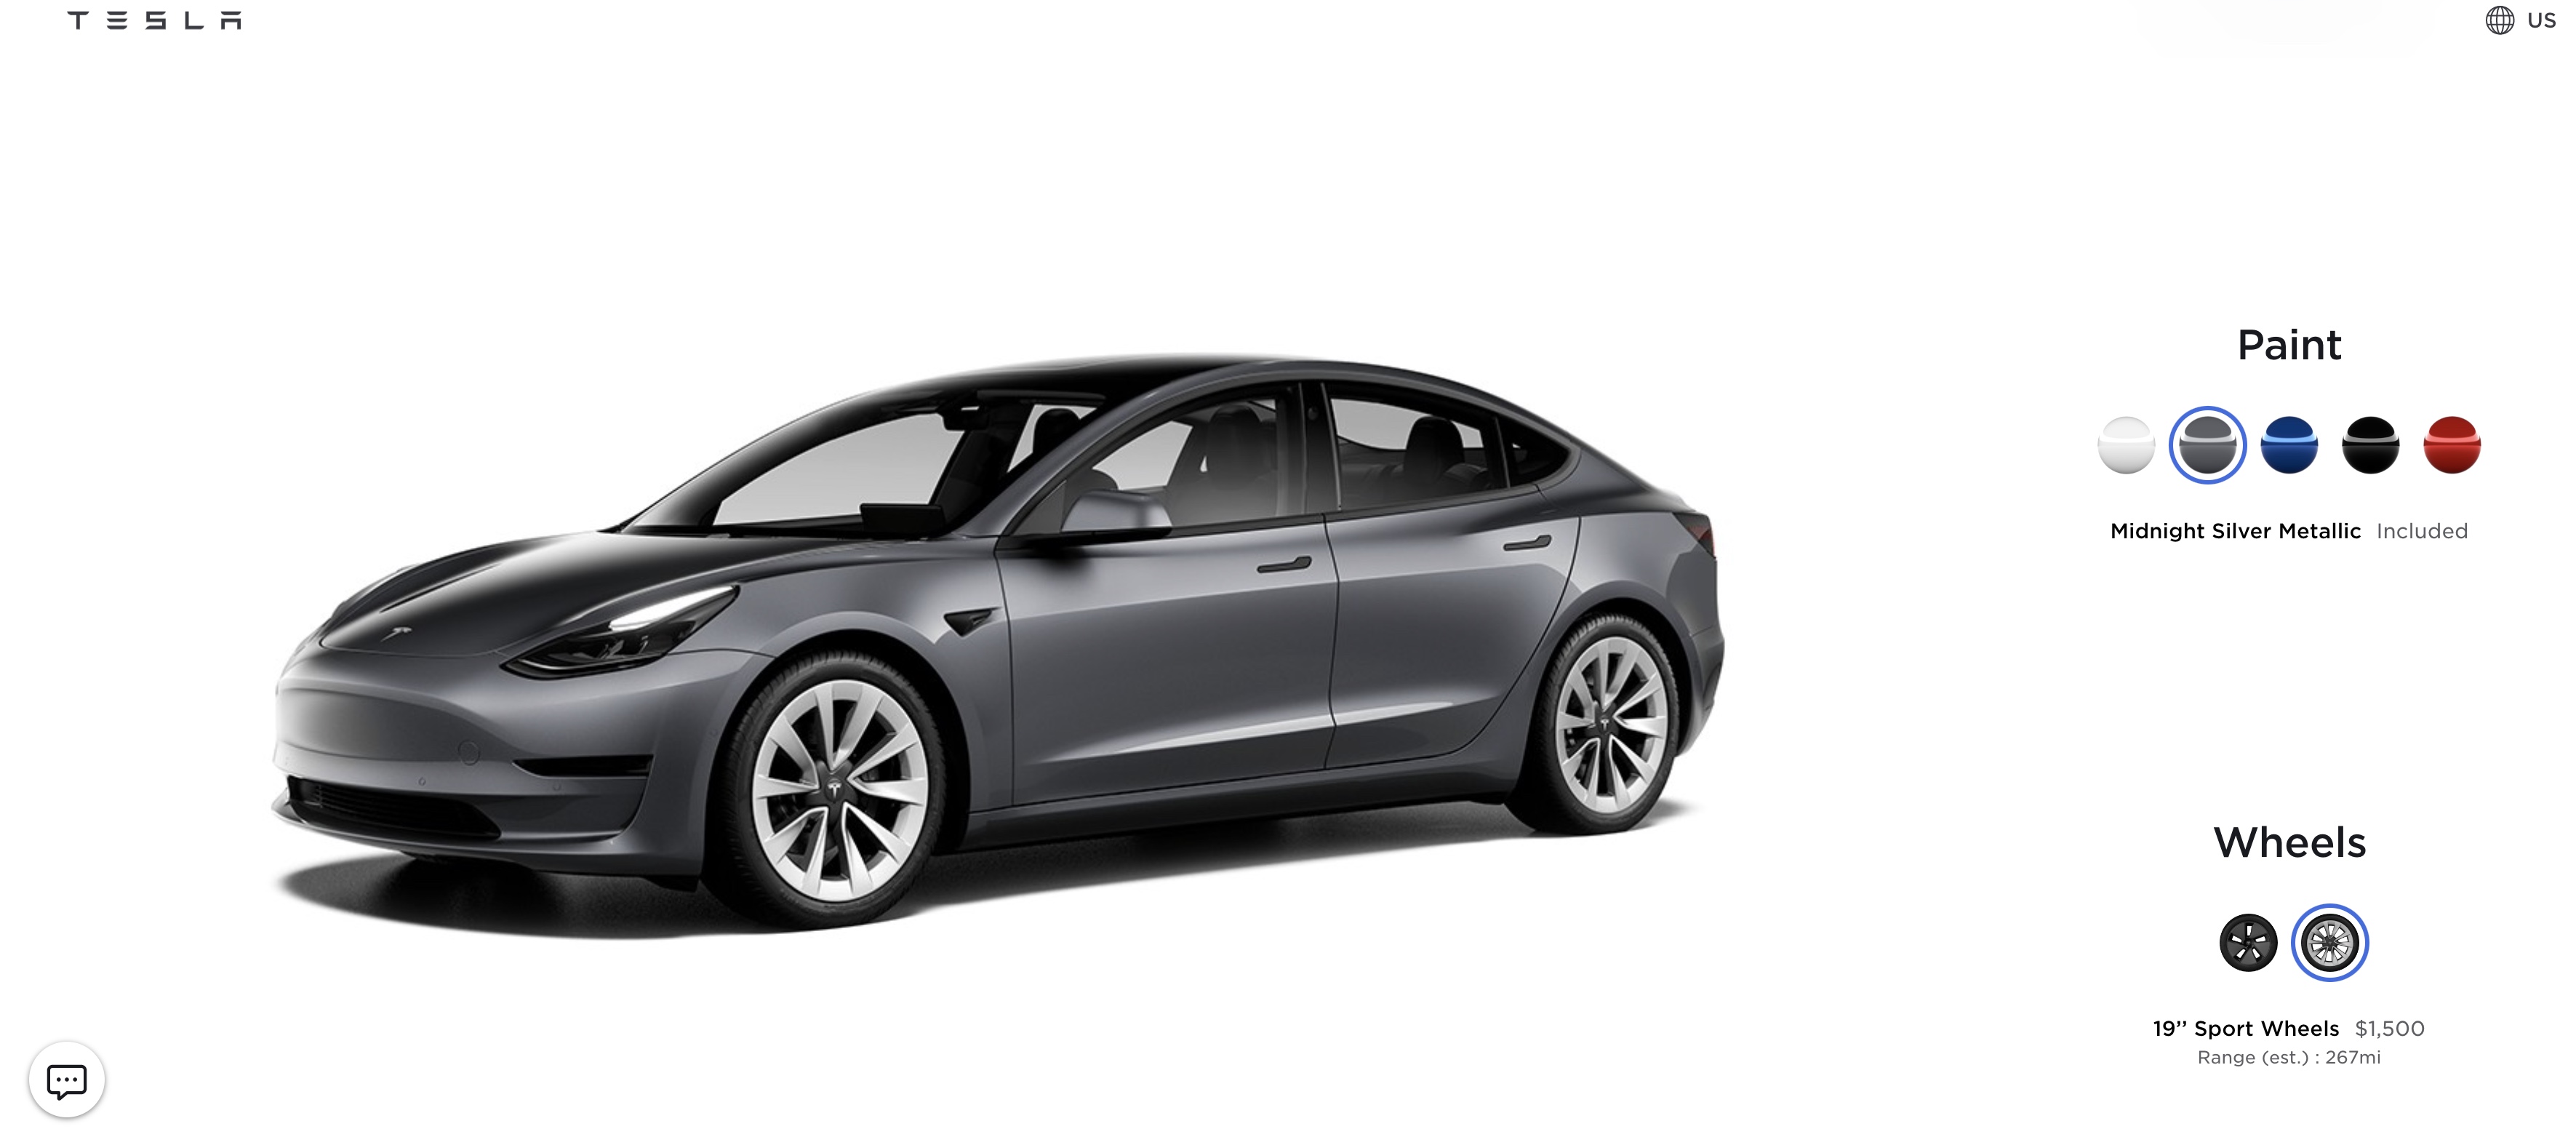 Tesla Model 3 and Model Y Prices Rise Again; Each Up $1,000